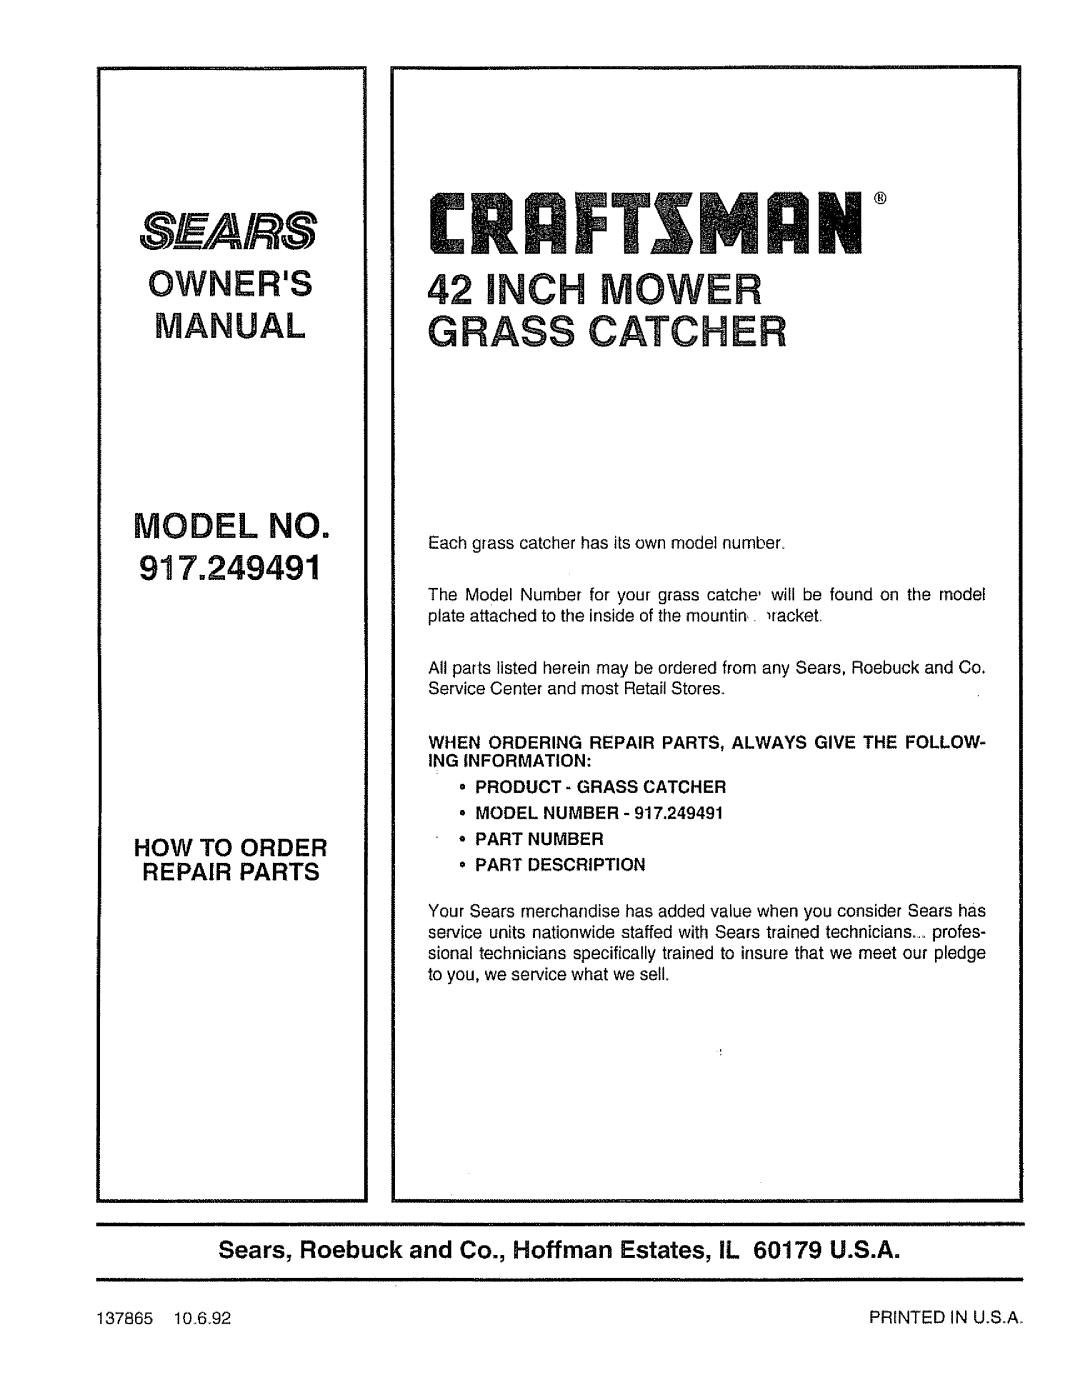 Sears 917.249491 owner manual iNCH MOWER GRASS CATCHER, Owners, Model No, How To Order Repair Parts, S _Ai S, Manual 